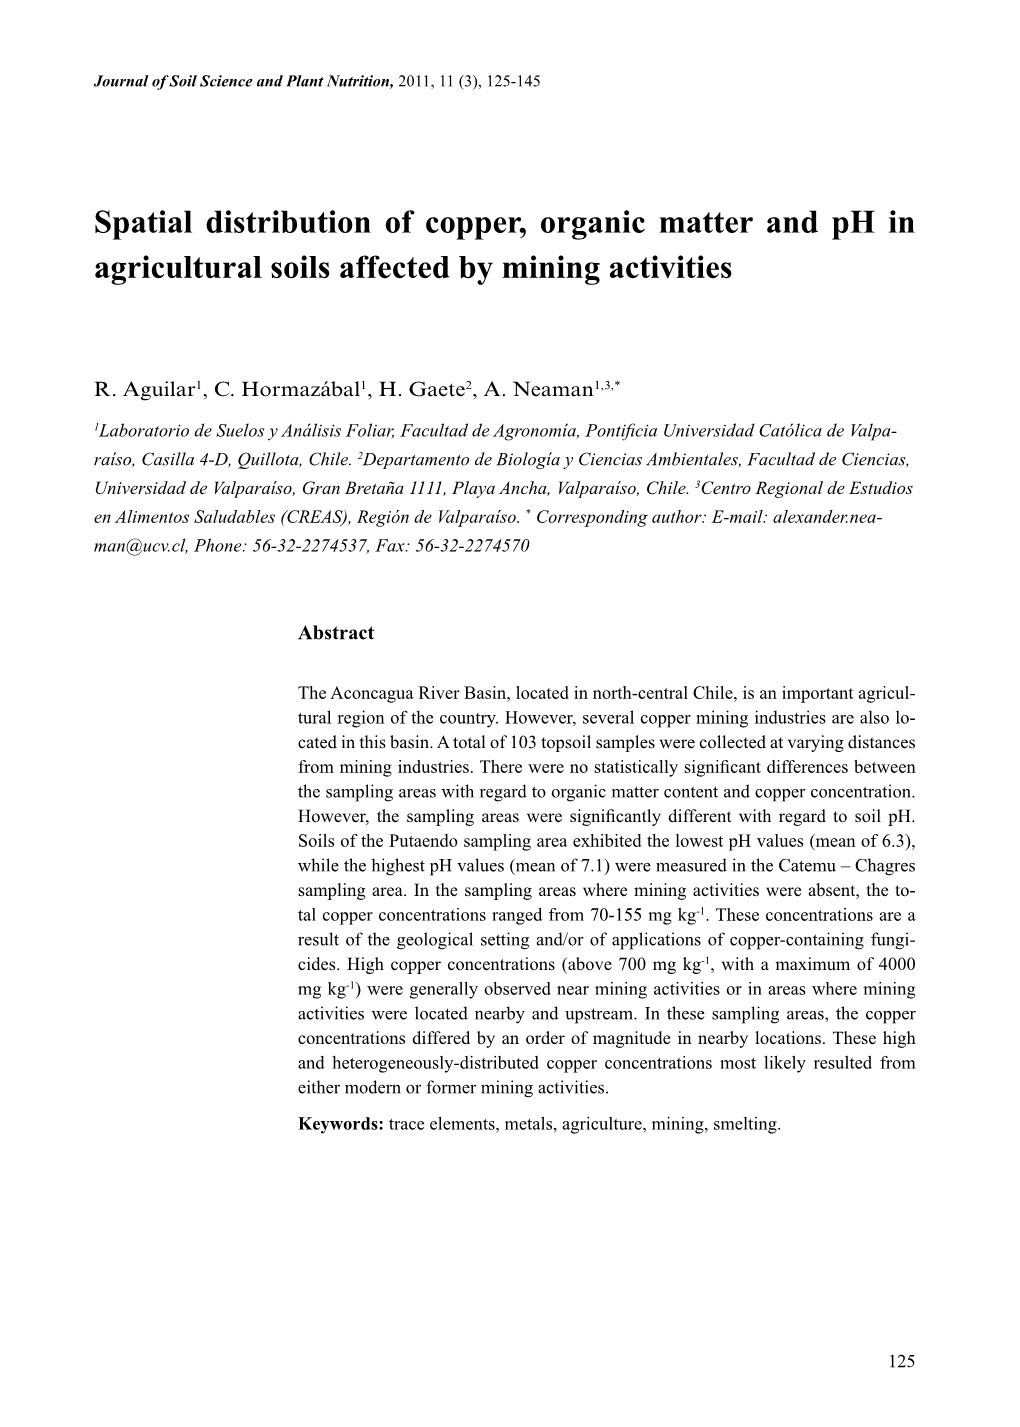 Spatial Distribution of Copper, Organic Matter and Ph in Agricultural Soils Affected by Mining Activities